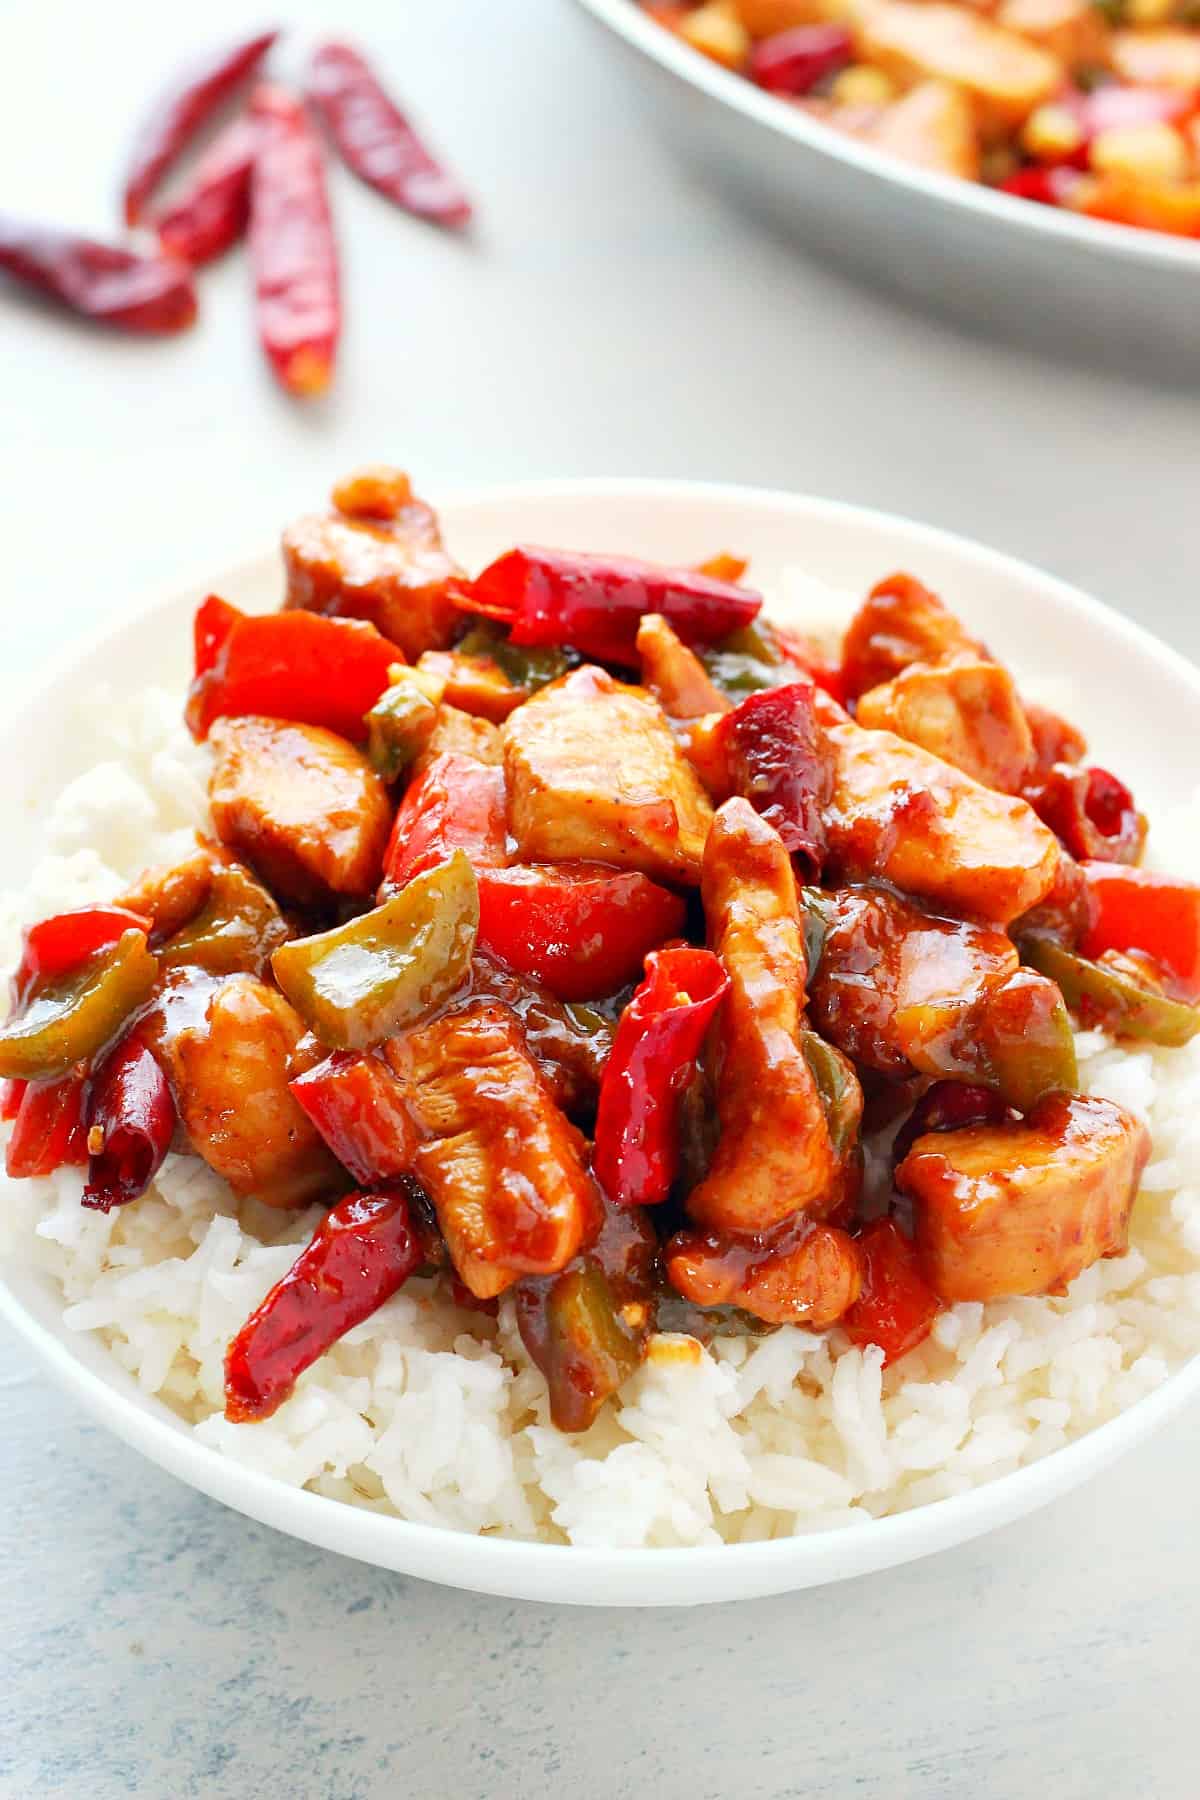 kung pao chicken D 1 Kung Pao Chicken